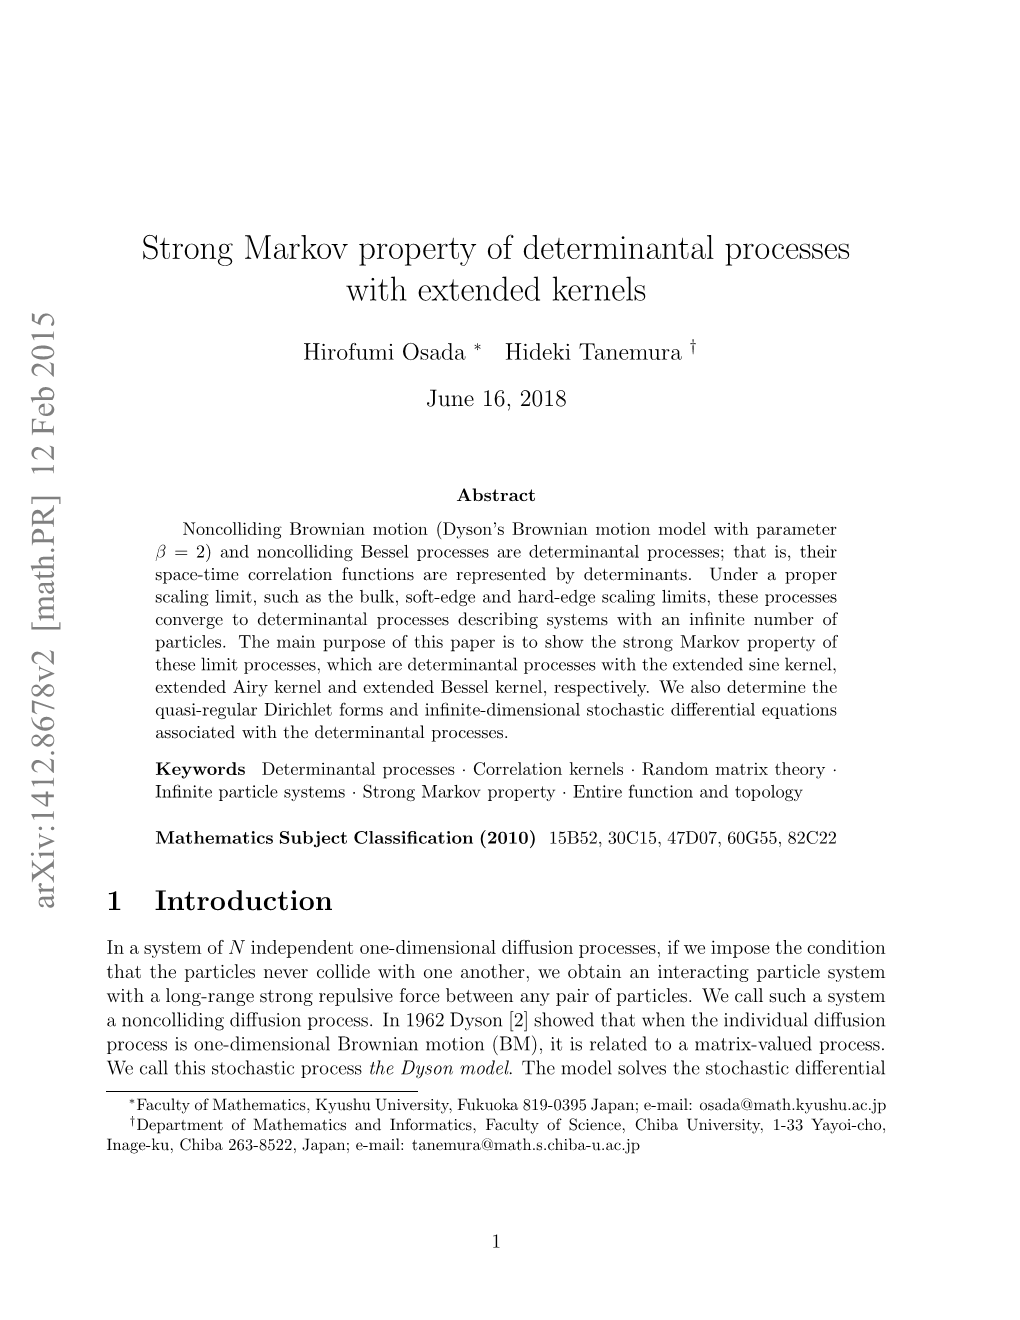 Strong Markov Property of Determinantal Processes With